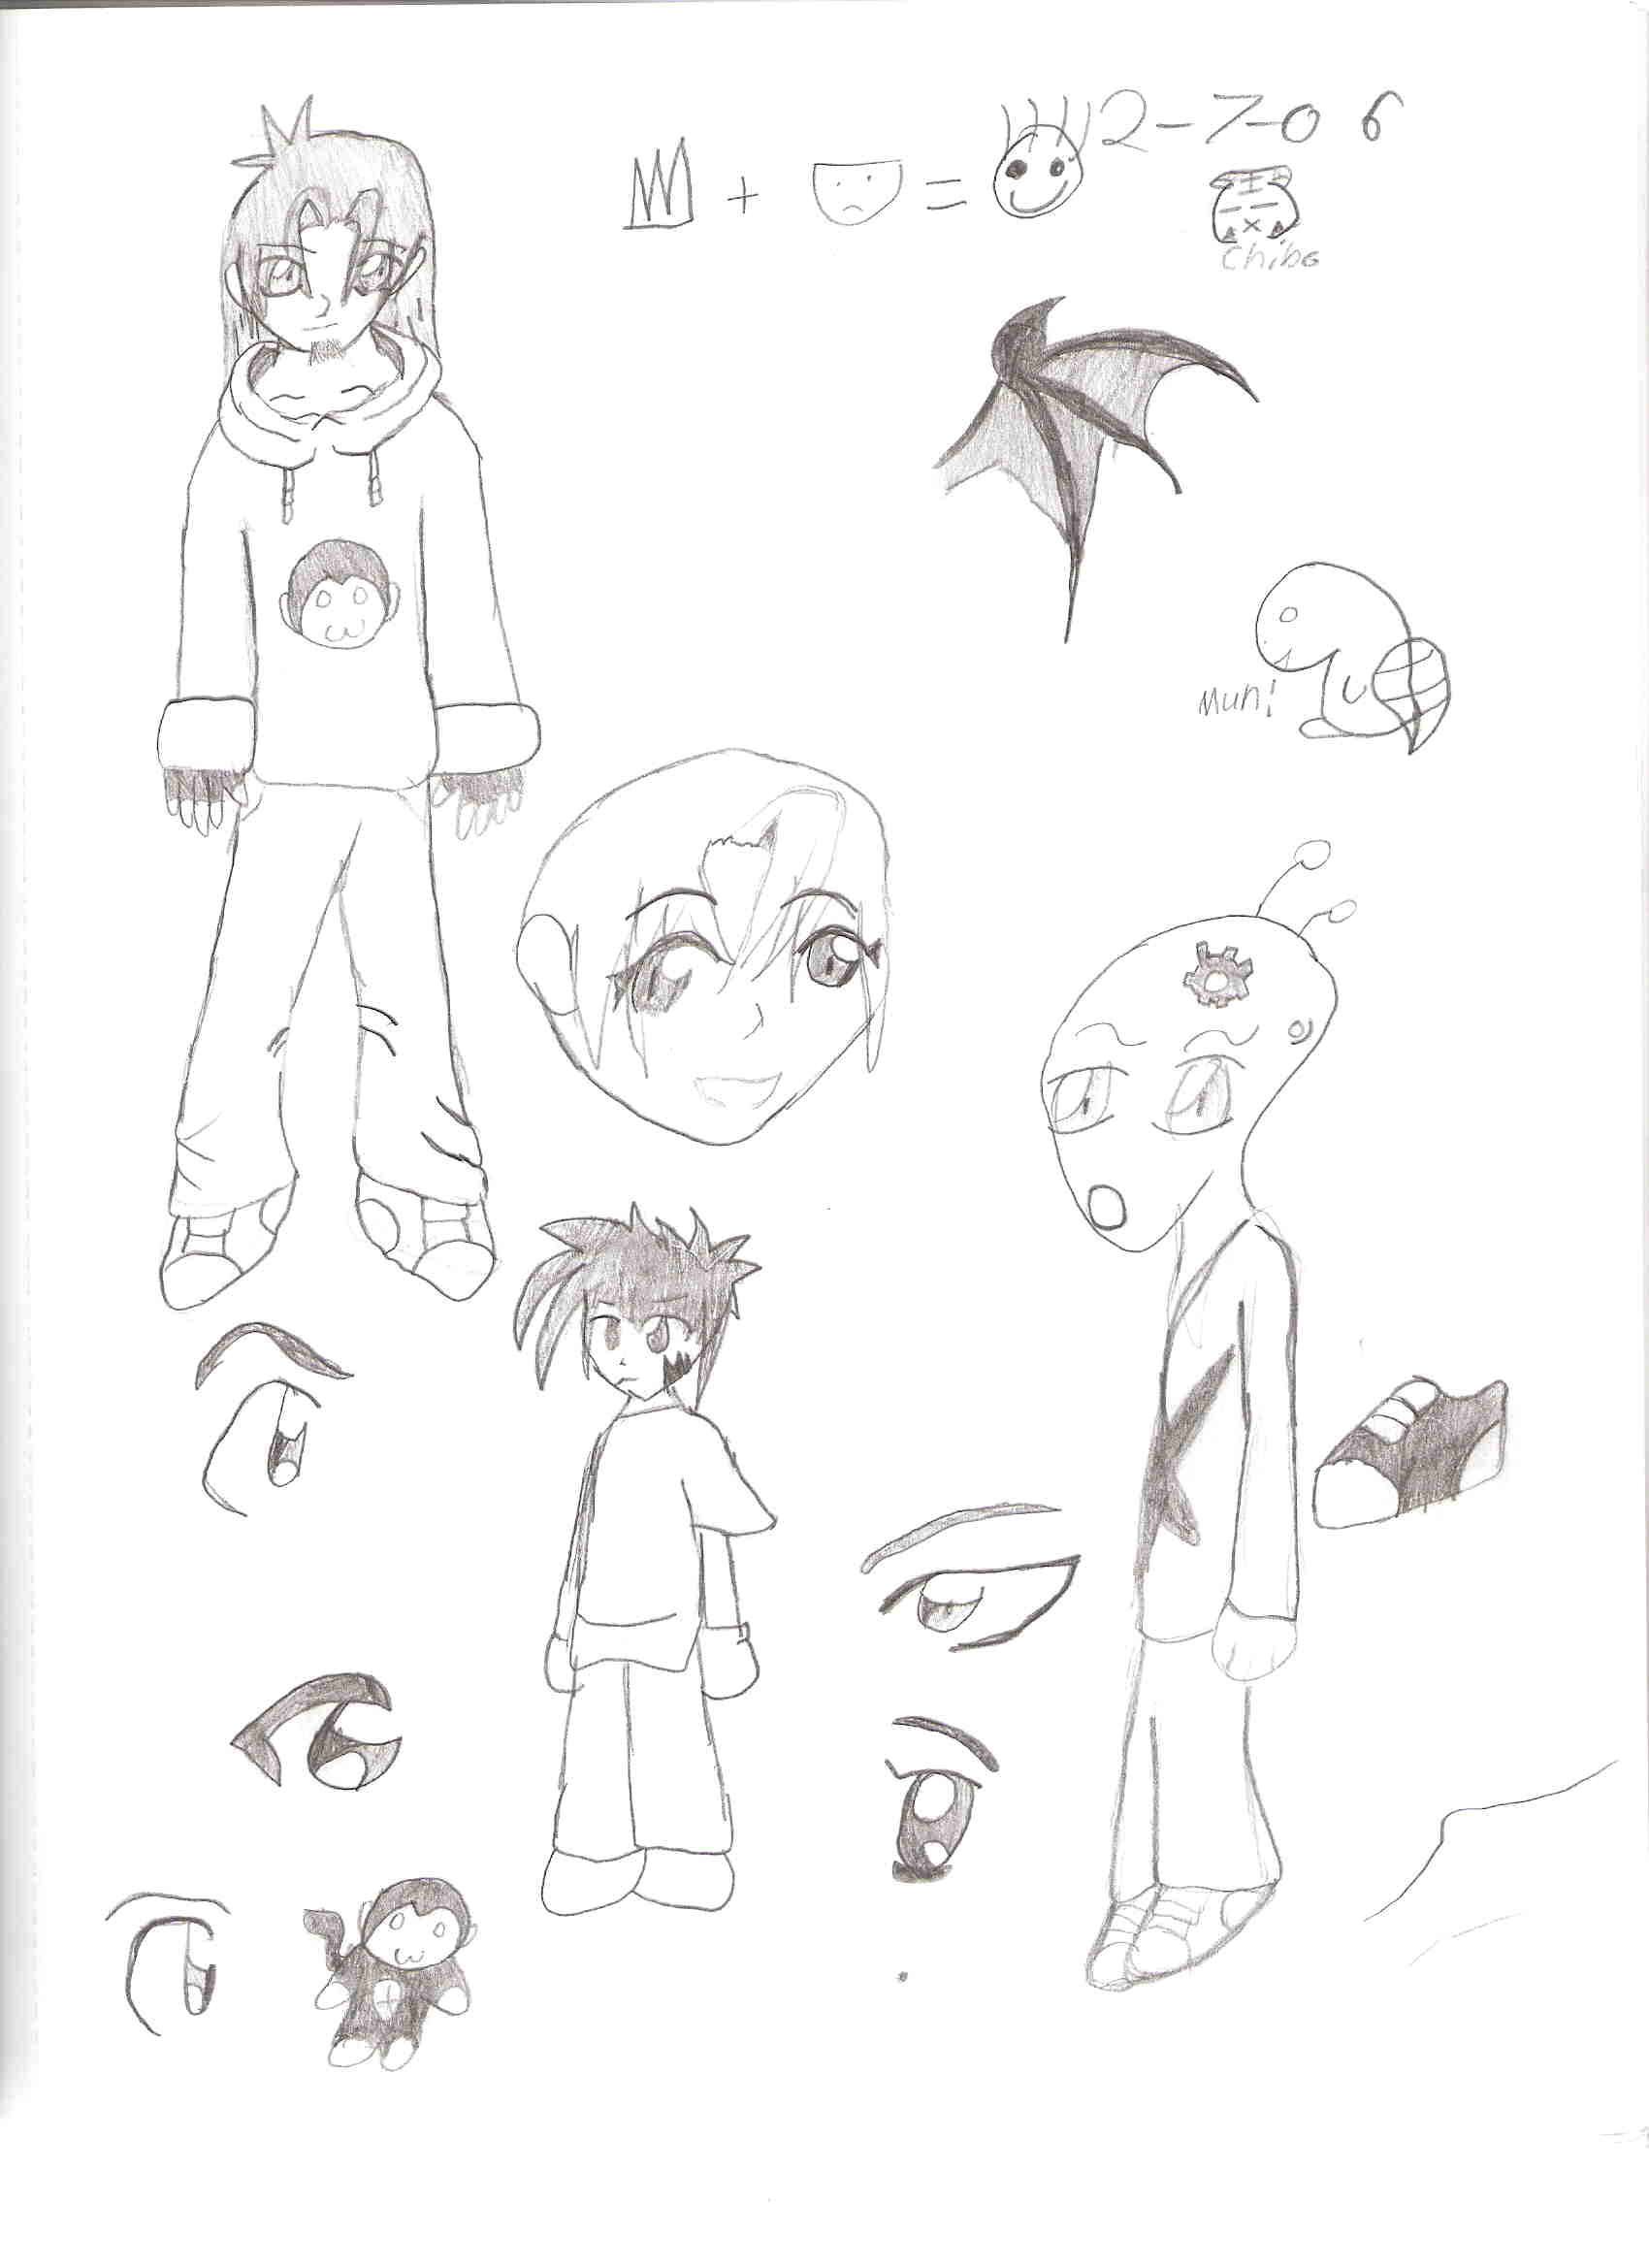 Some cool doodles by Chibo